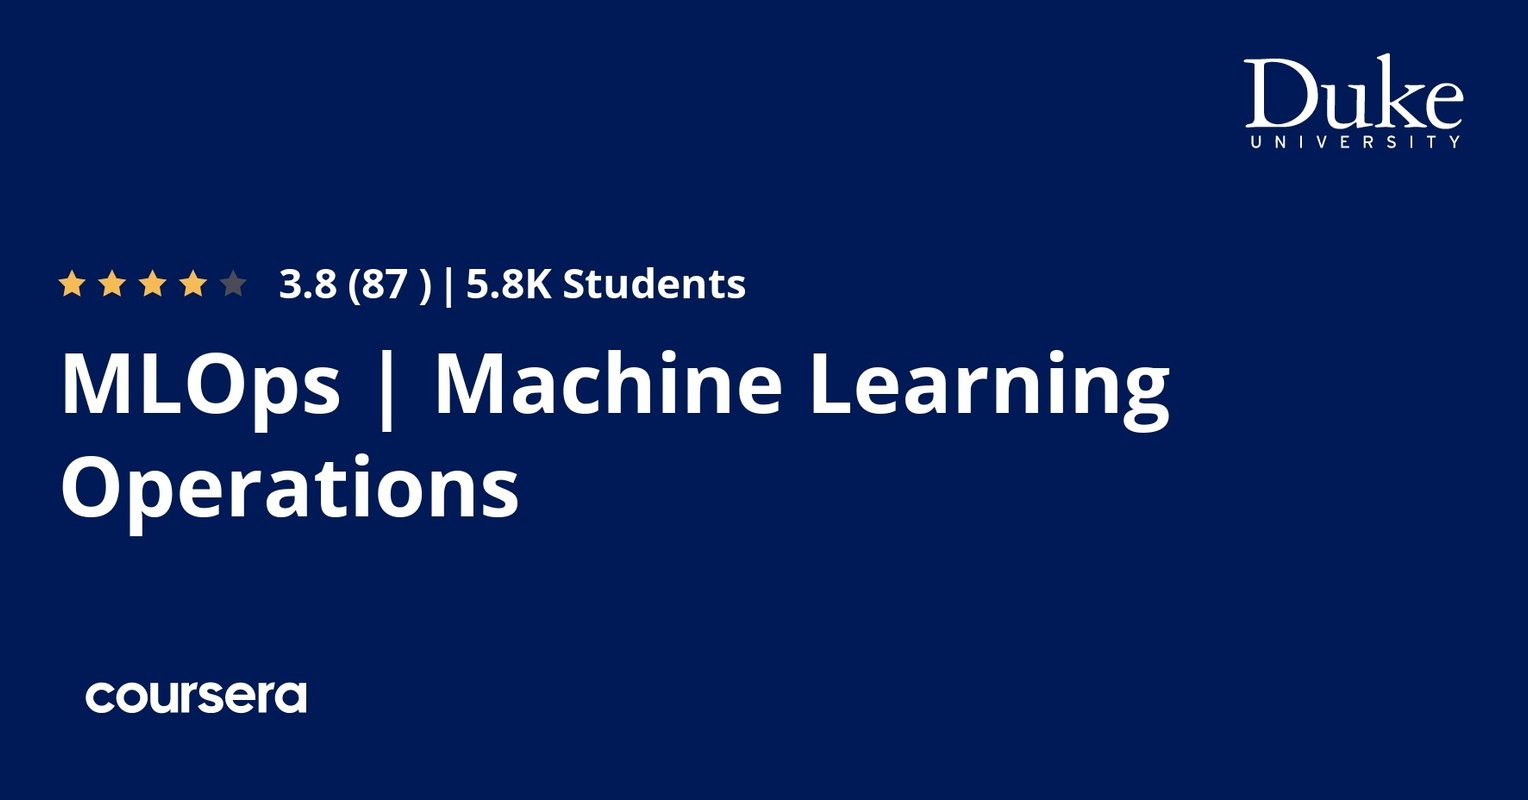 MLOps | Machine Learning Operations Specialization